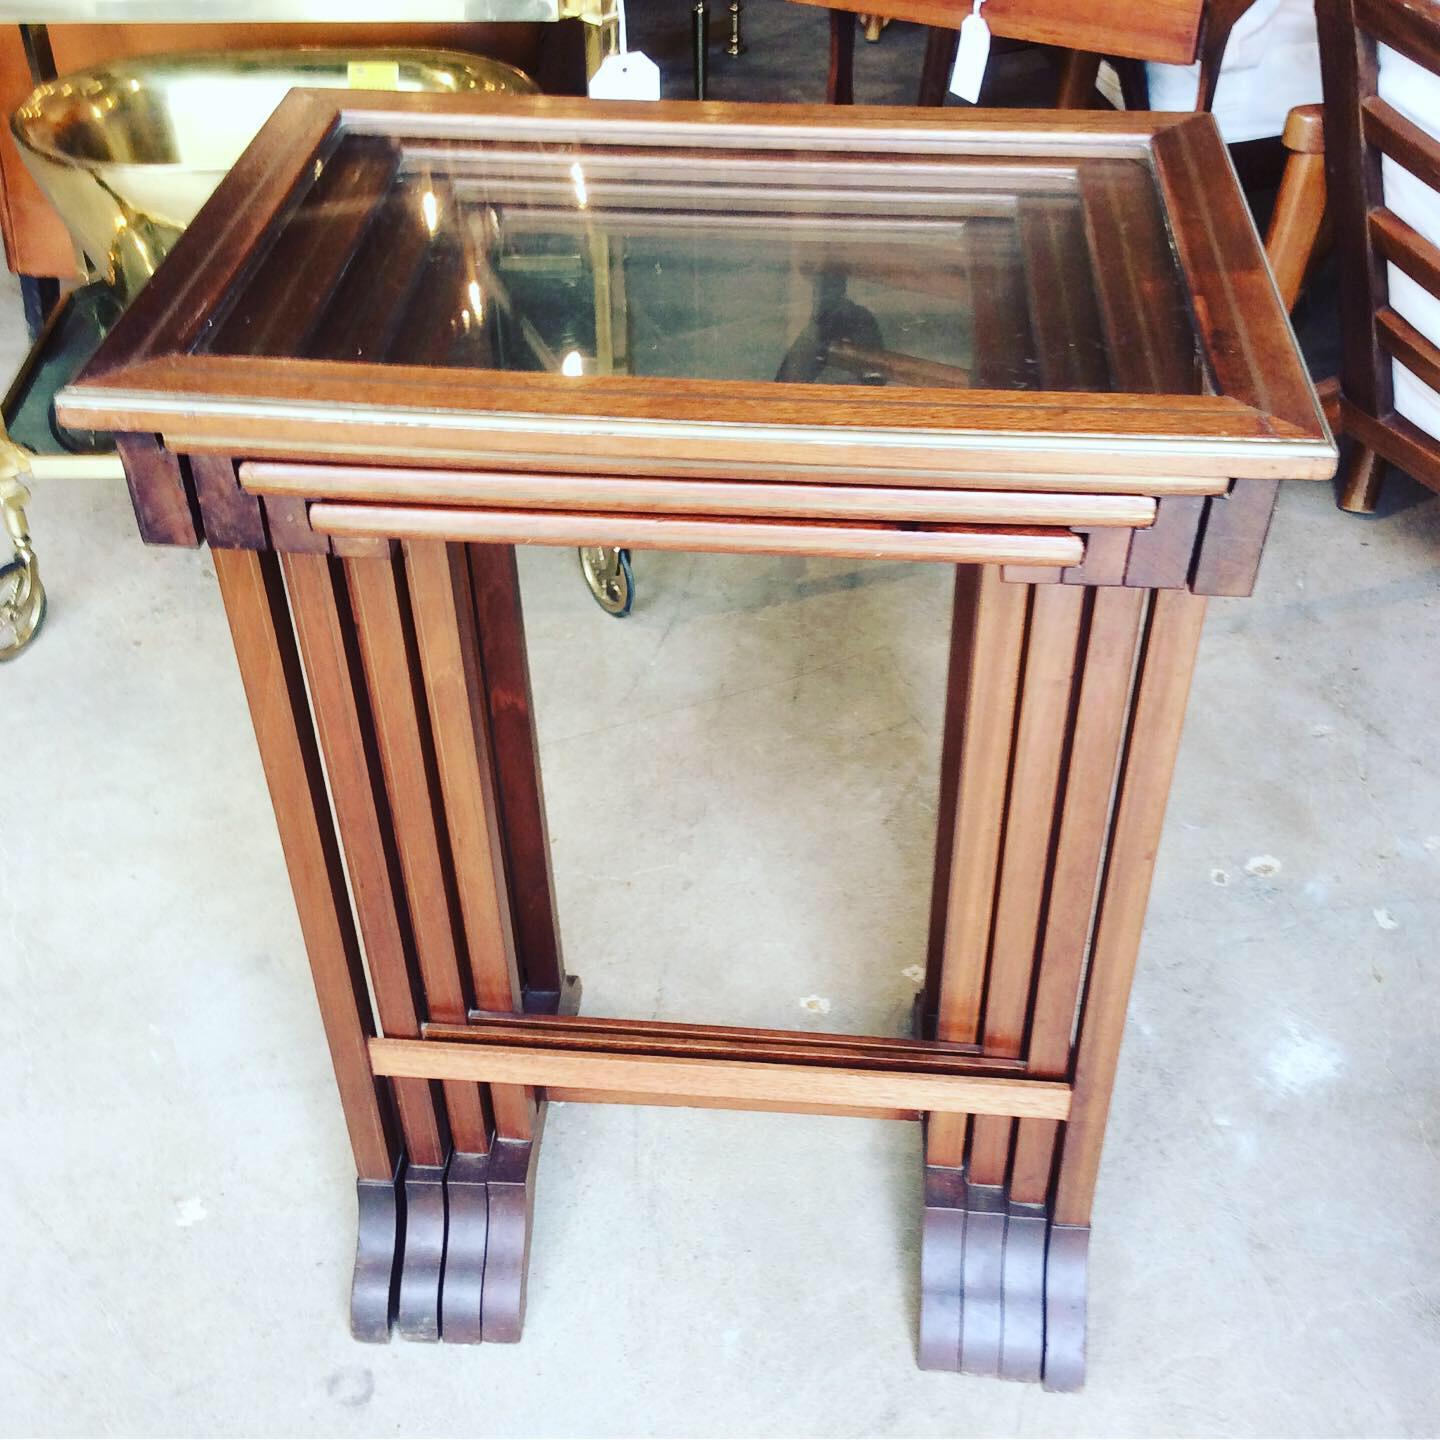 Early 20th Century French Wood, Glass and Brass Nesting Tables, 4 Pieces For Sale 2